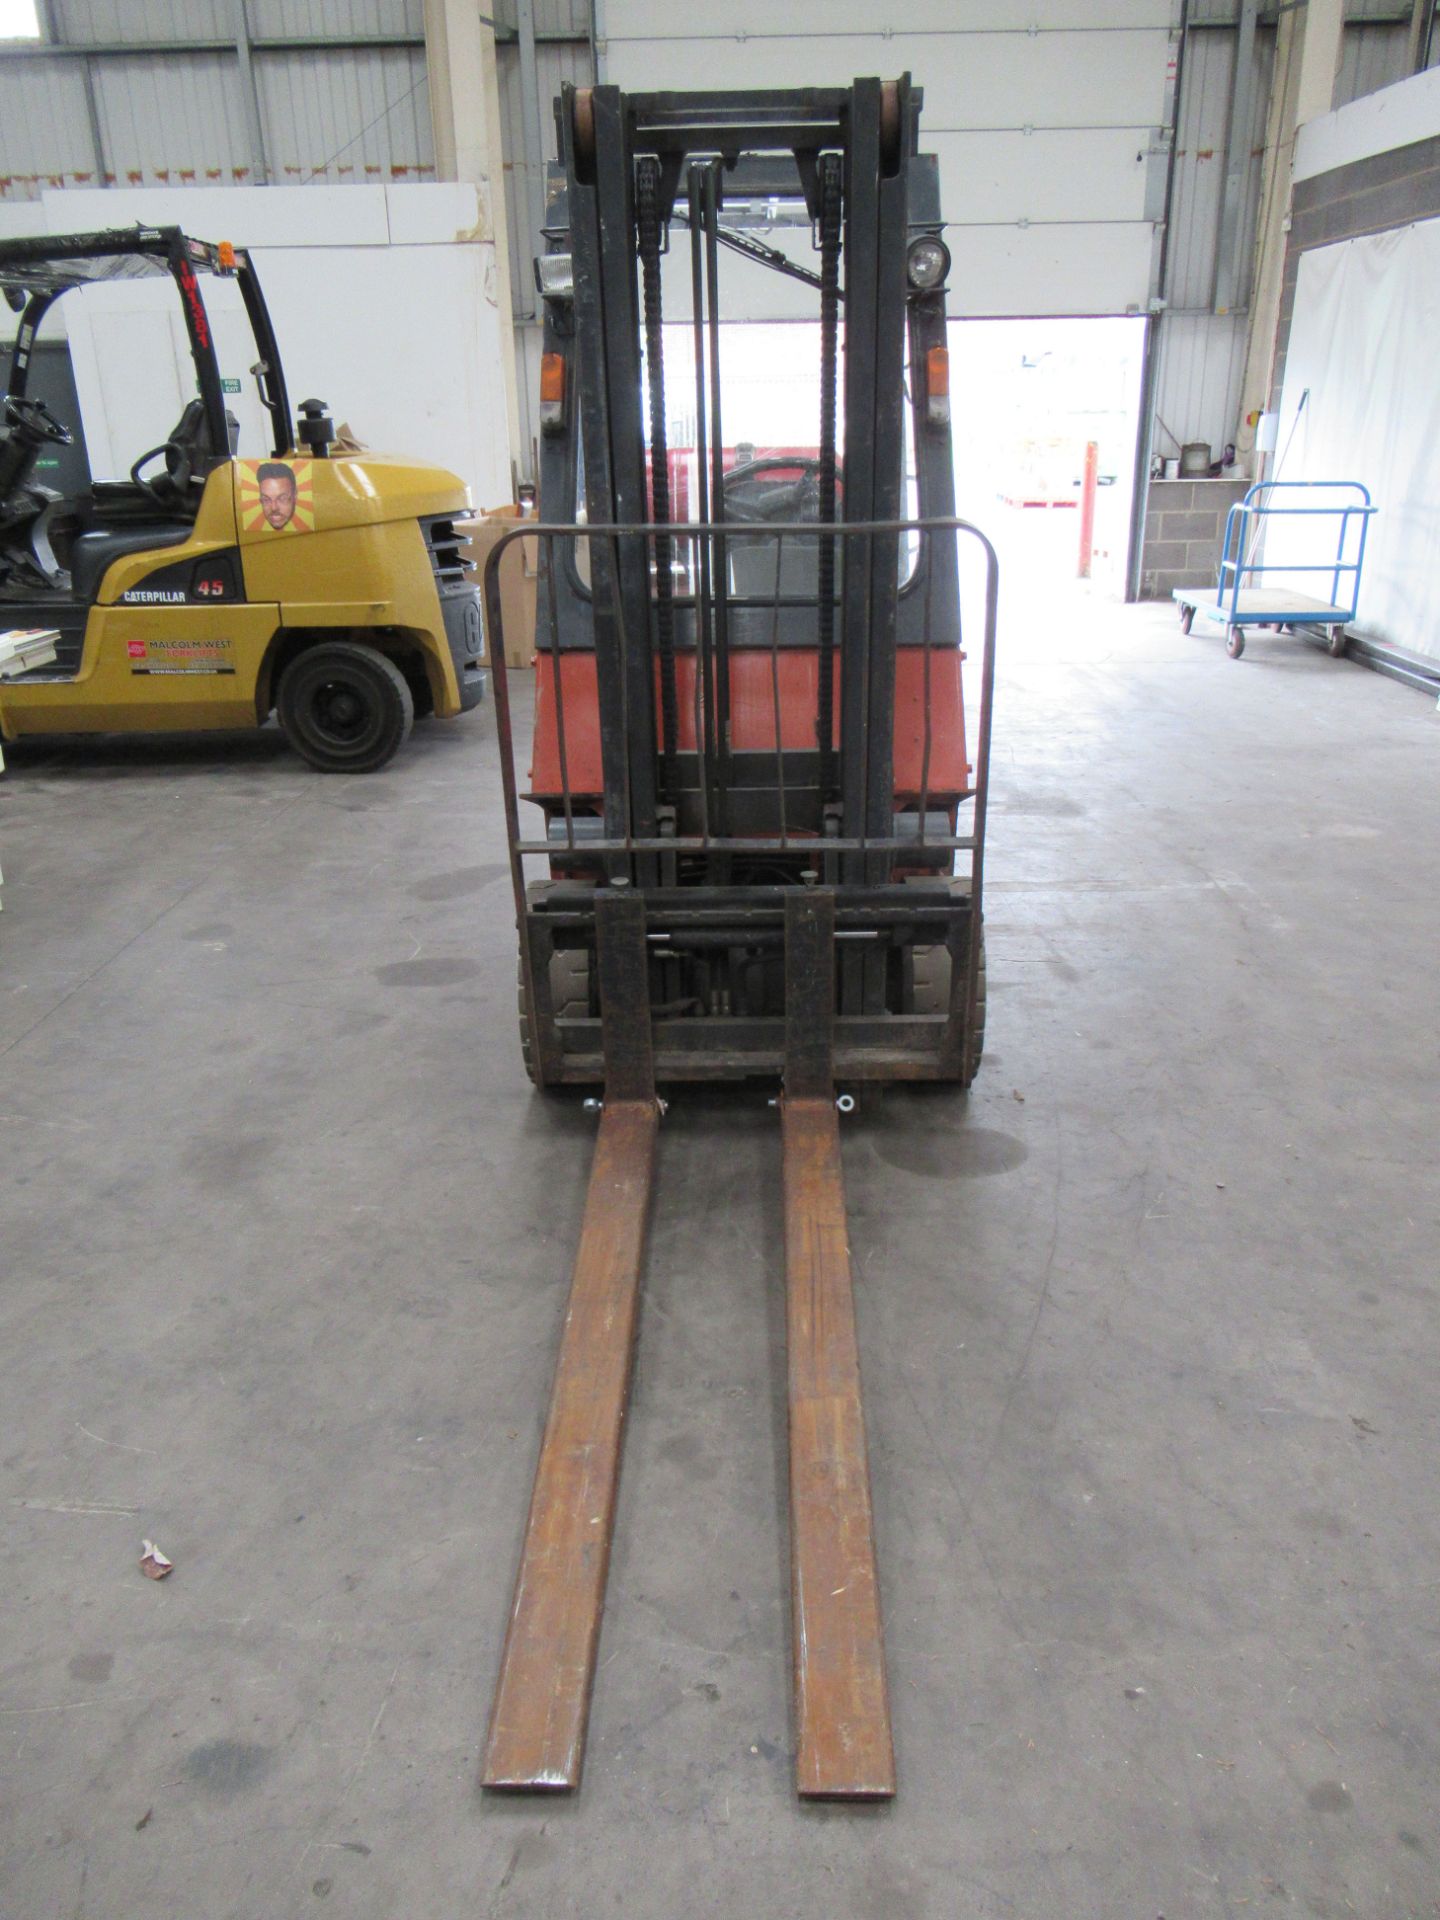 Nissan 25 Gas Powered Forklift Truck with Sideshift Attachment, Max Capacity 2500kg. Drives and Oper - Image 2 of 9